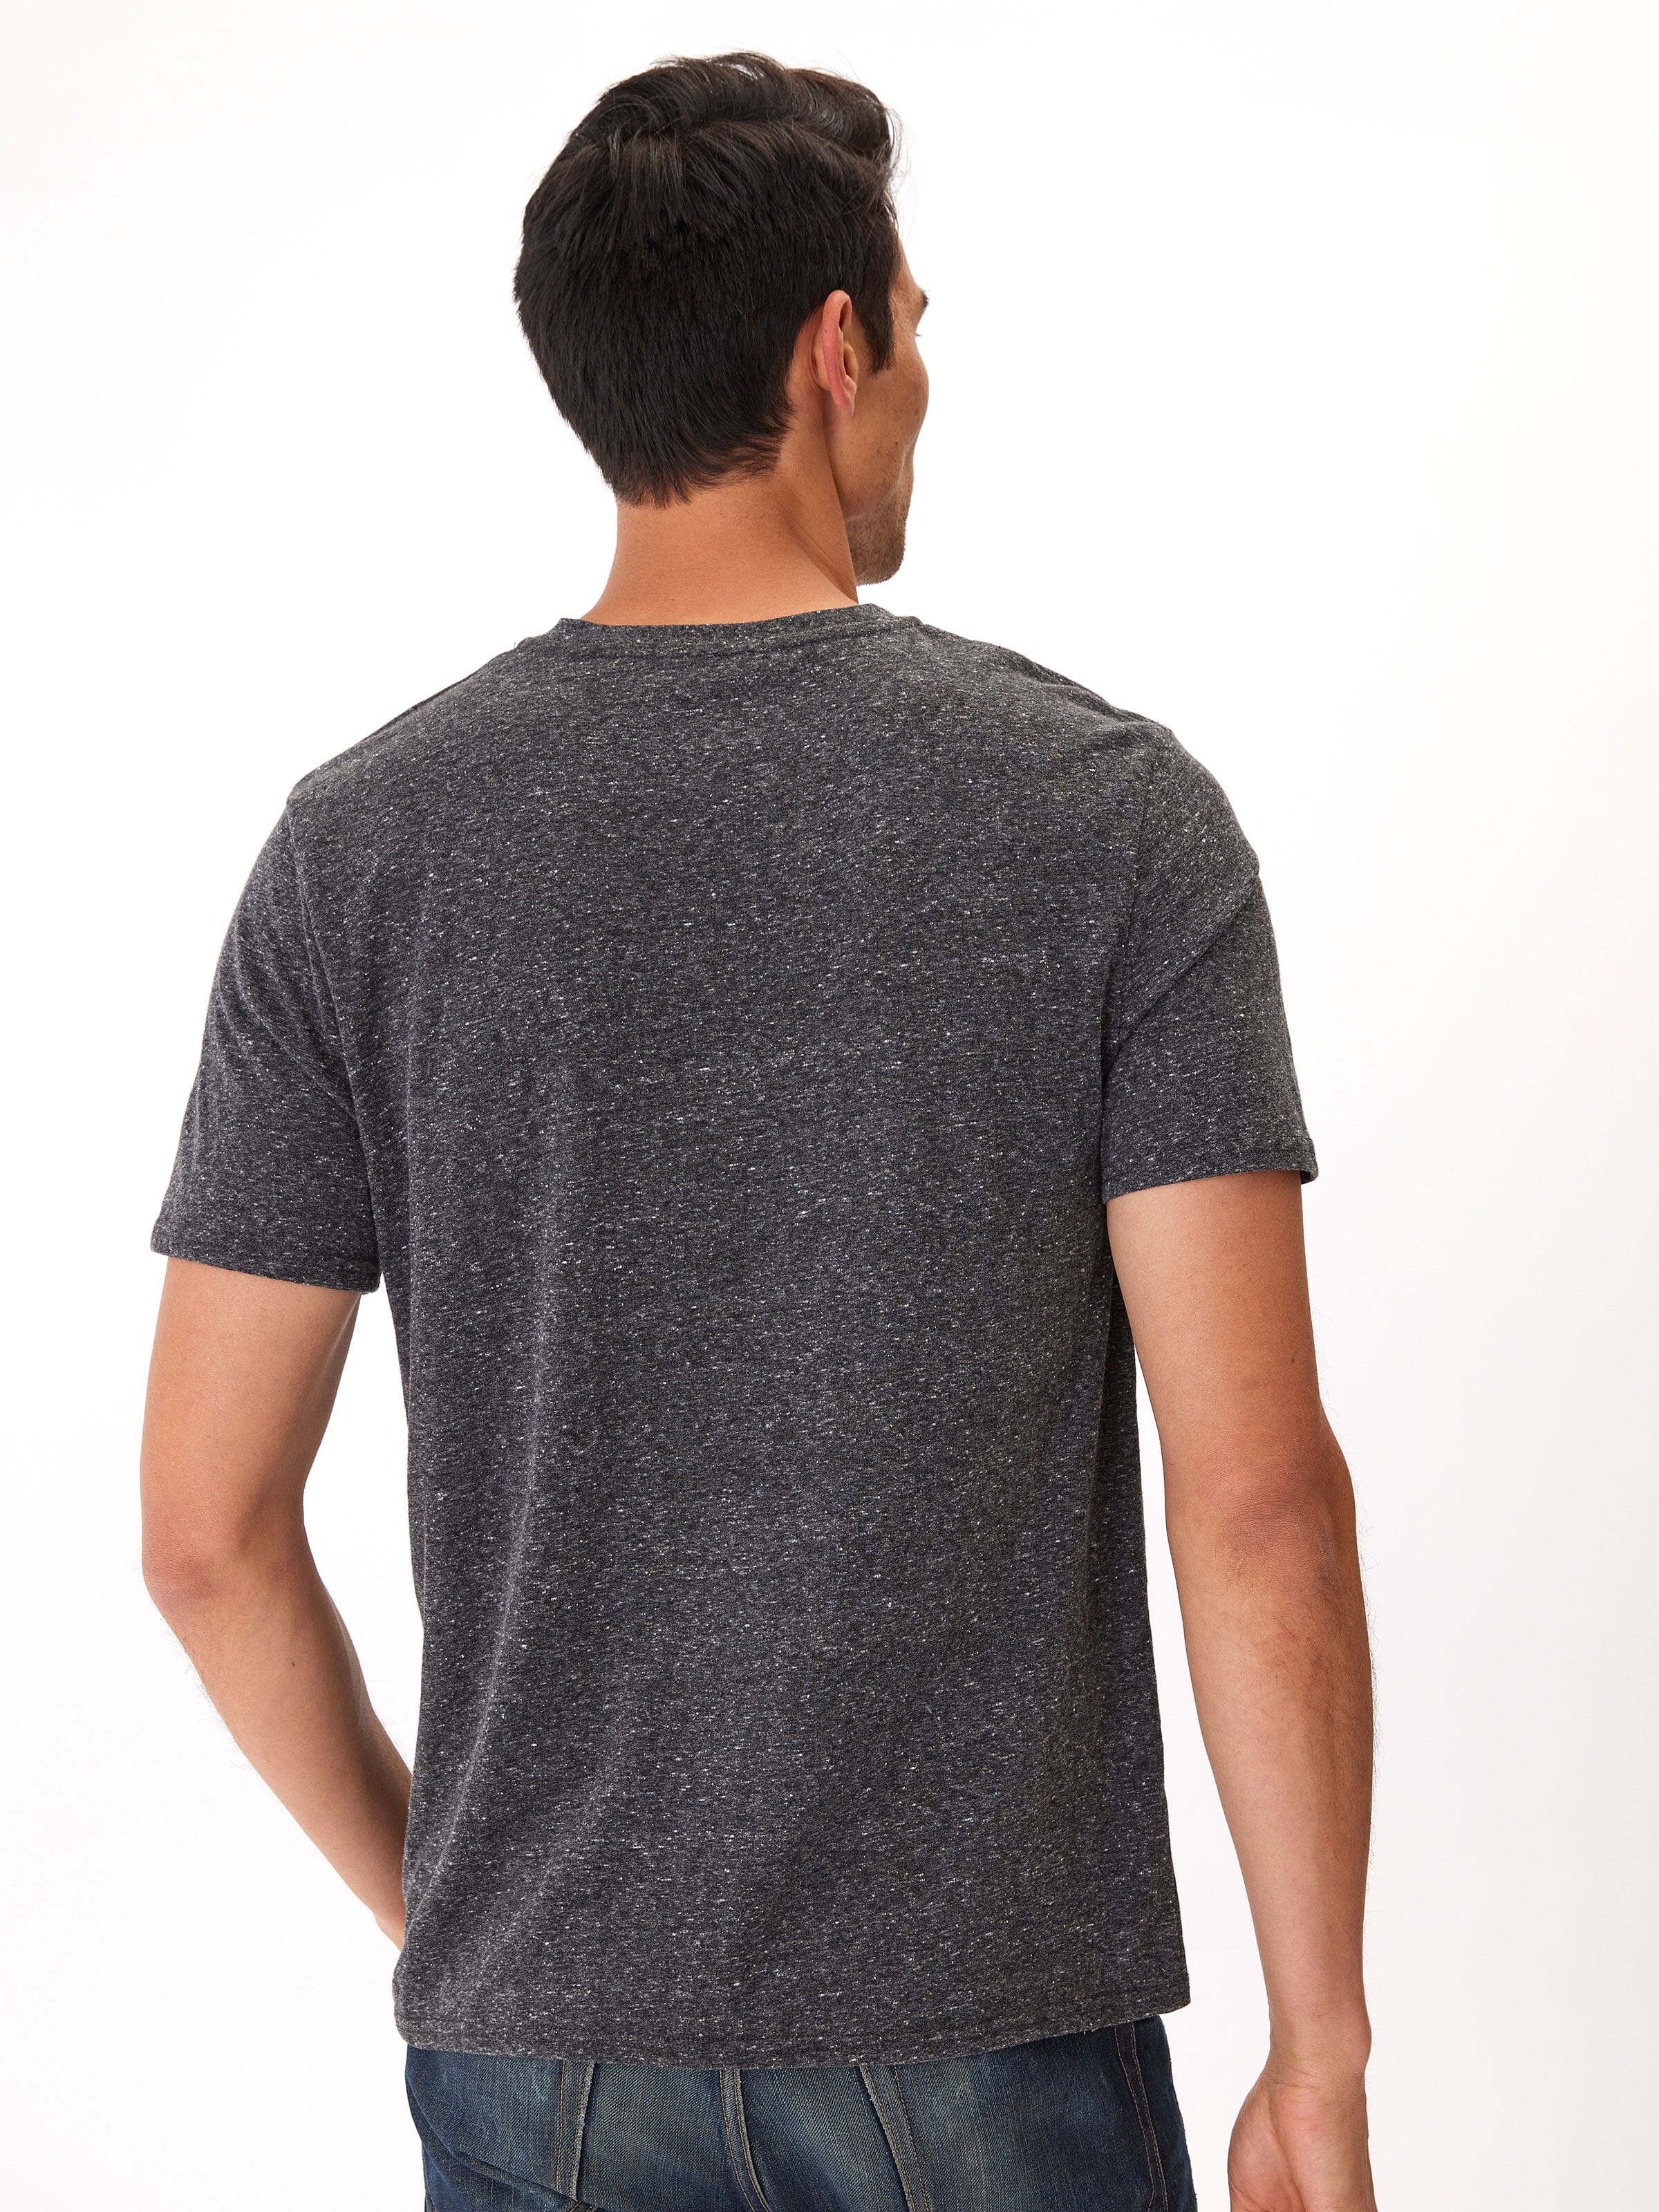 4 Threads Heather Triblend Grey Tee Crew in – Thought Neck